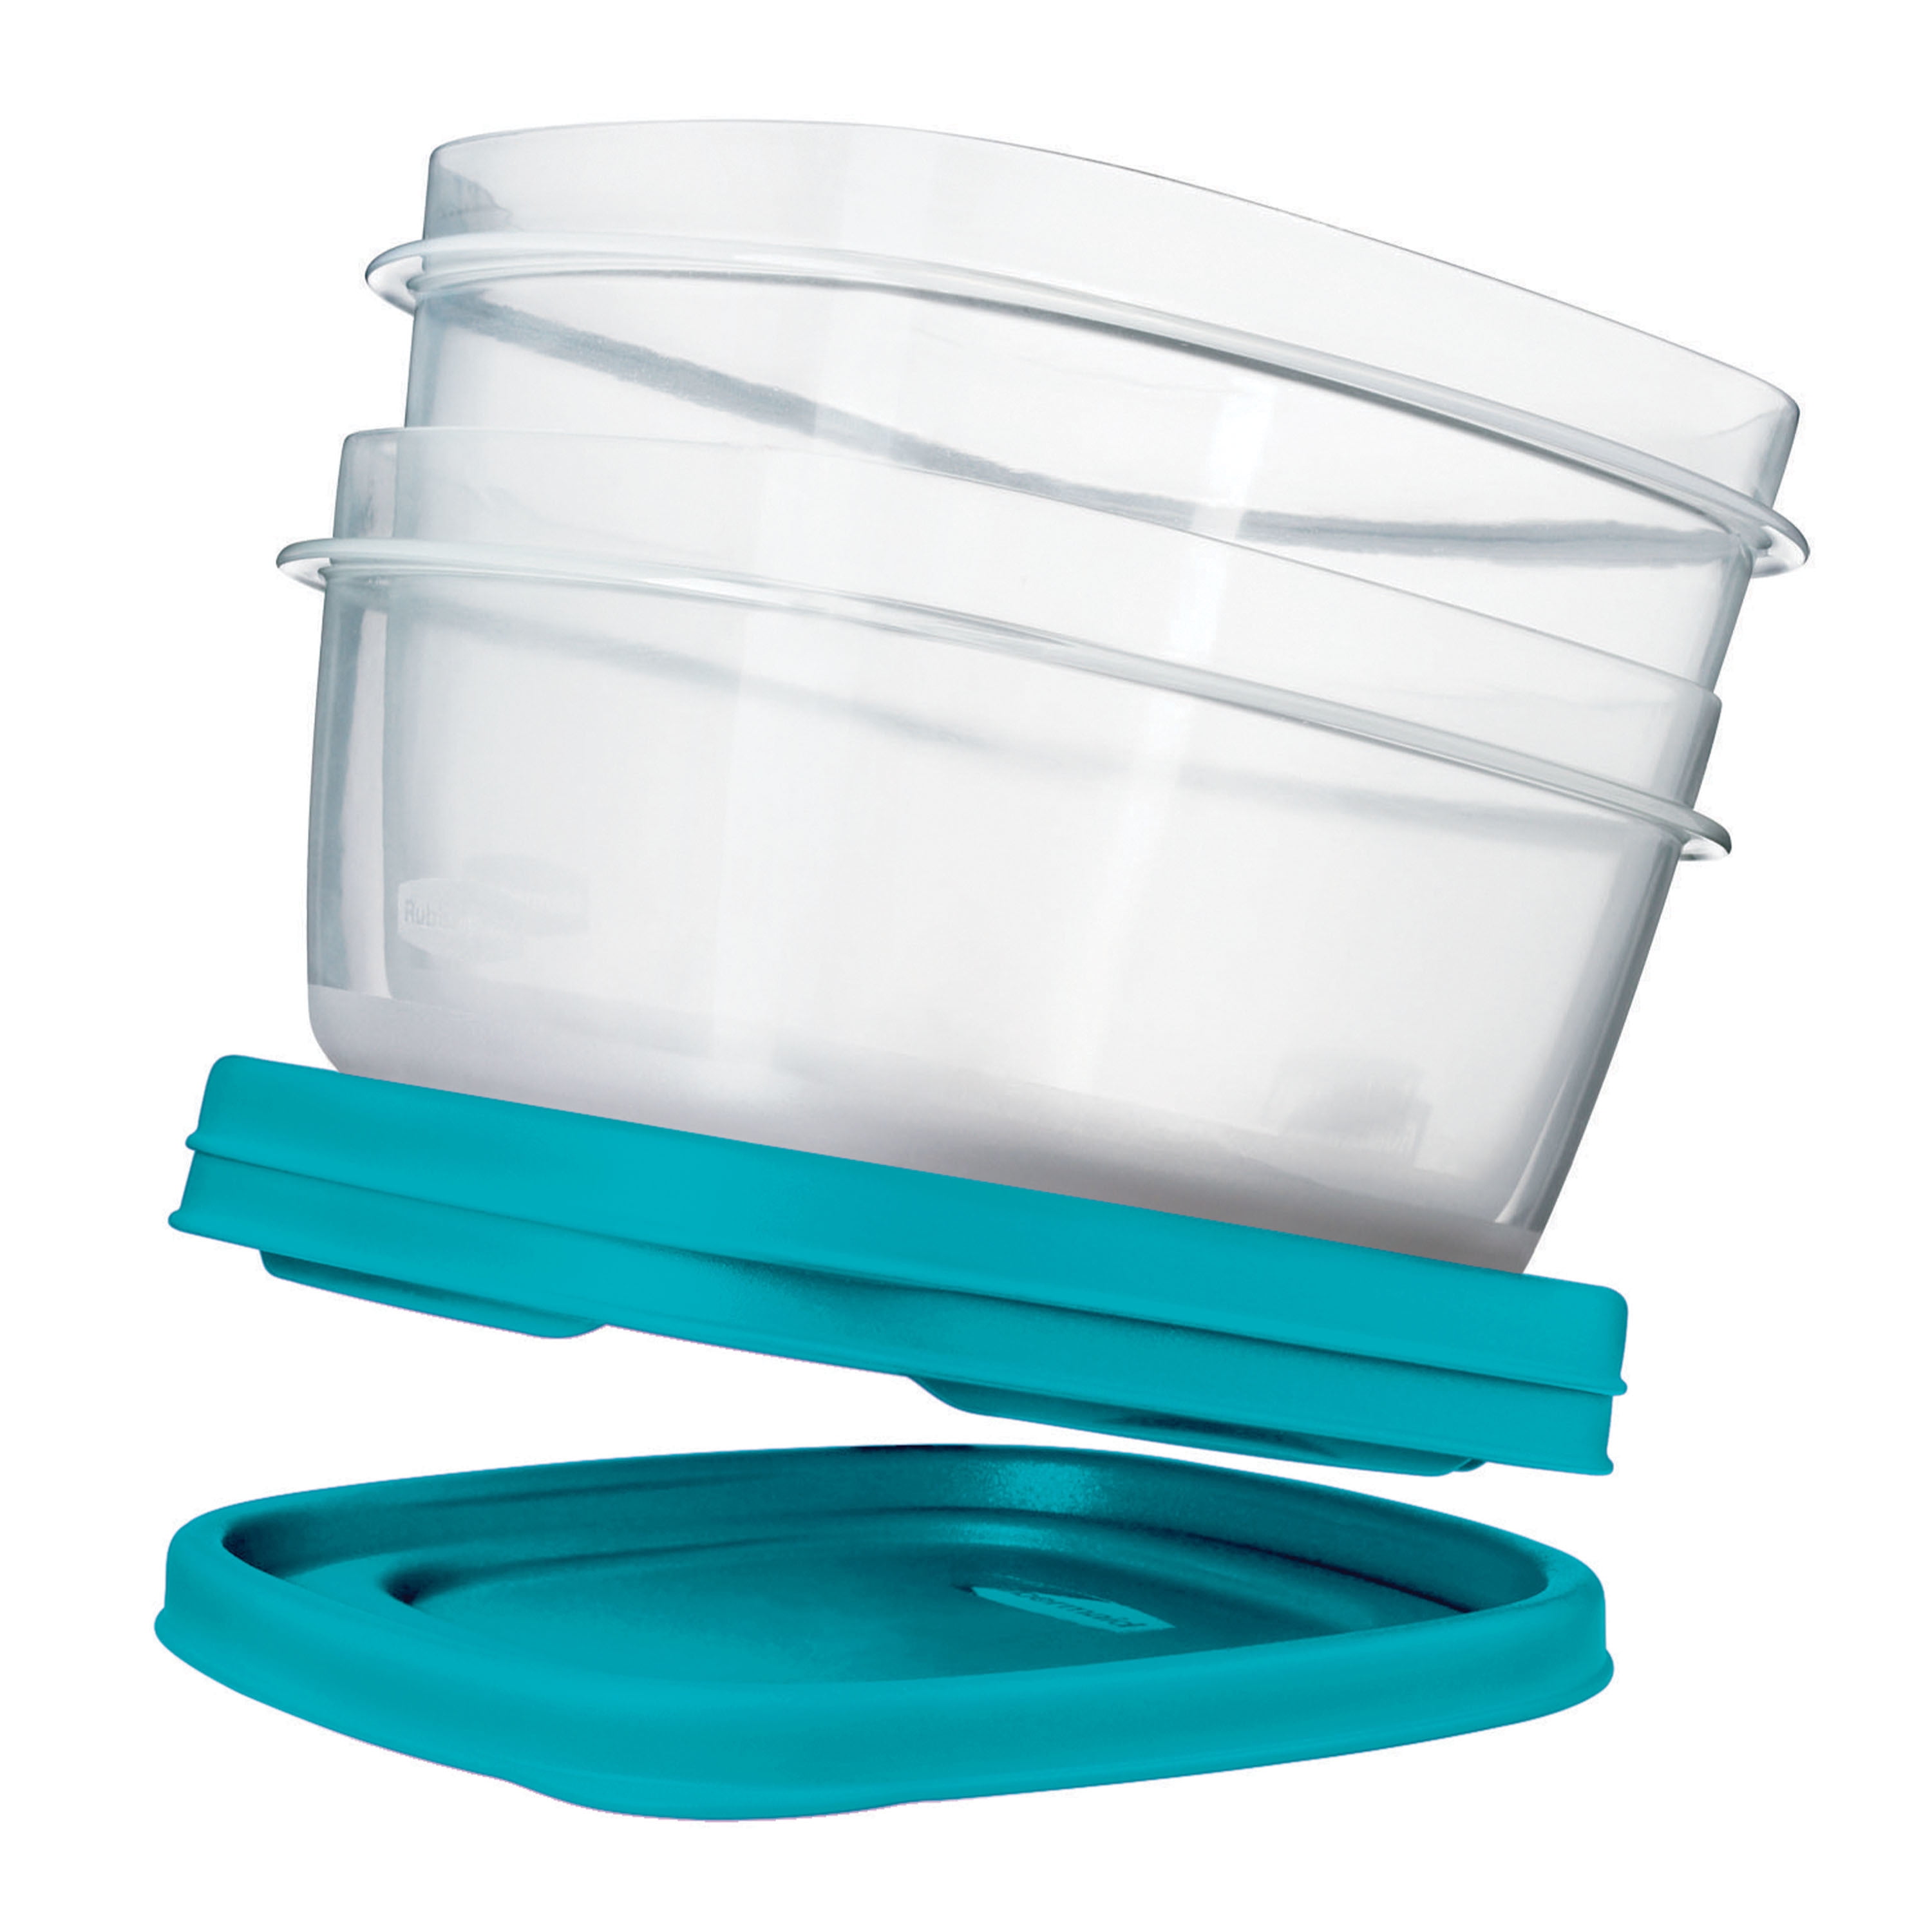  Rubbermaid 38-Piece Food Storage Containers with Snap Bases for  Easy Organization and Lids for Lunch, Meal Prep, and Leftovers, Dishwasher  Safe, Clear/Blue: Home & Kitchen